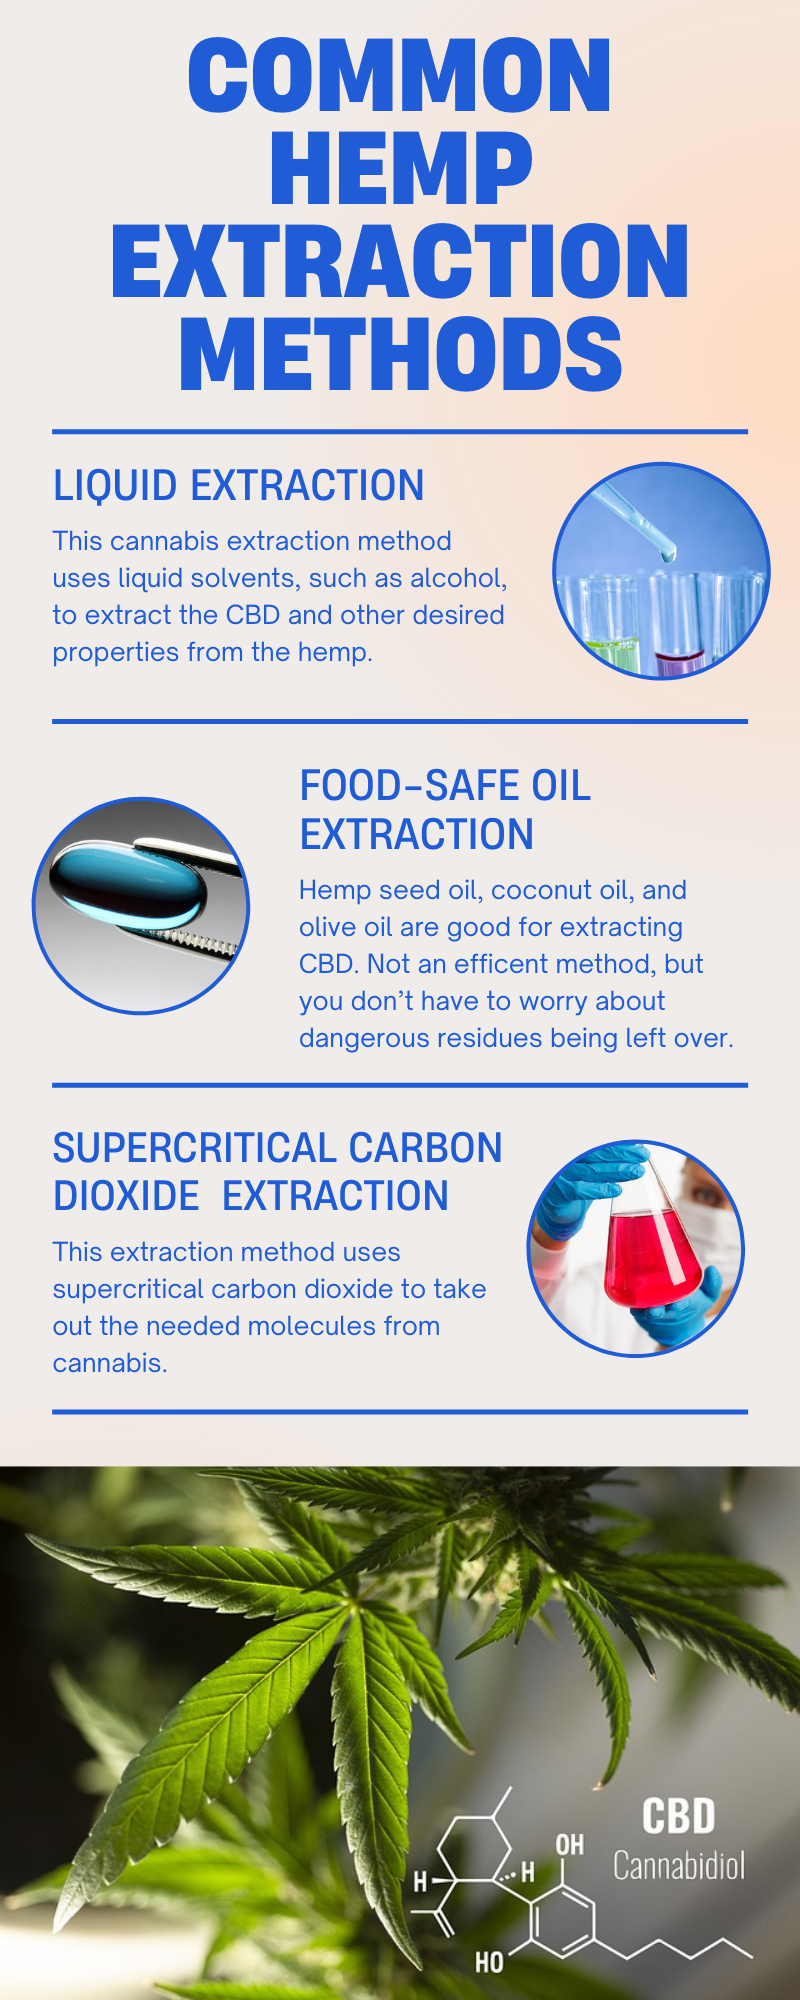 Common ways to extract CBD from cannabis. Liquid extraction, food-safe oil extraction, supercritical CO2.